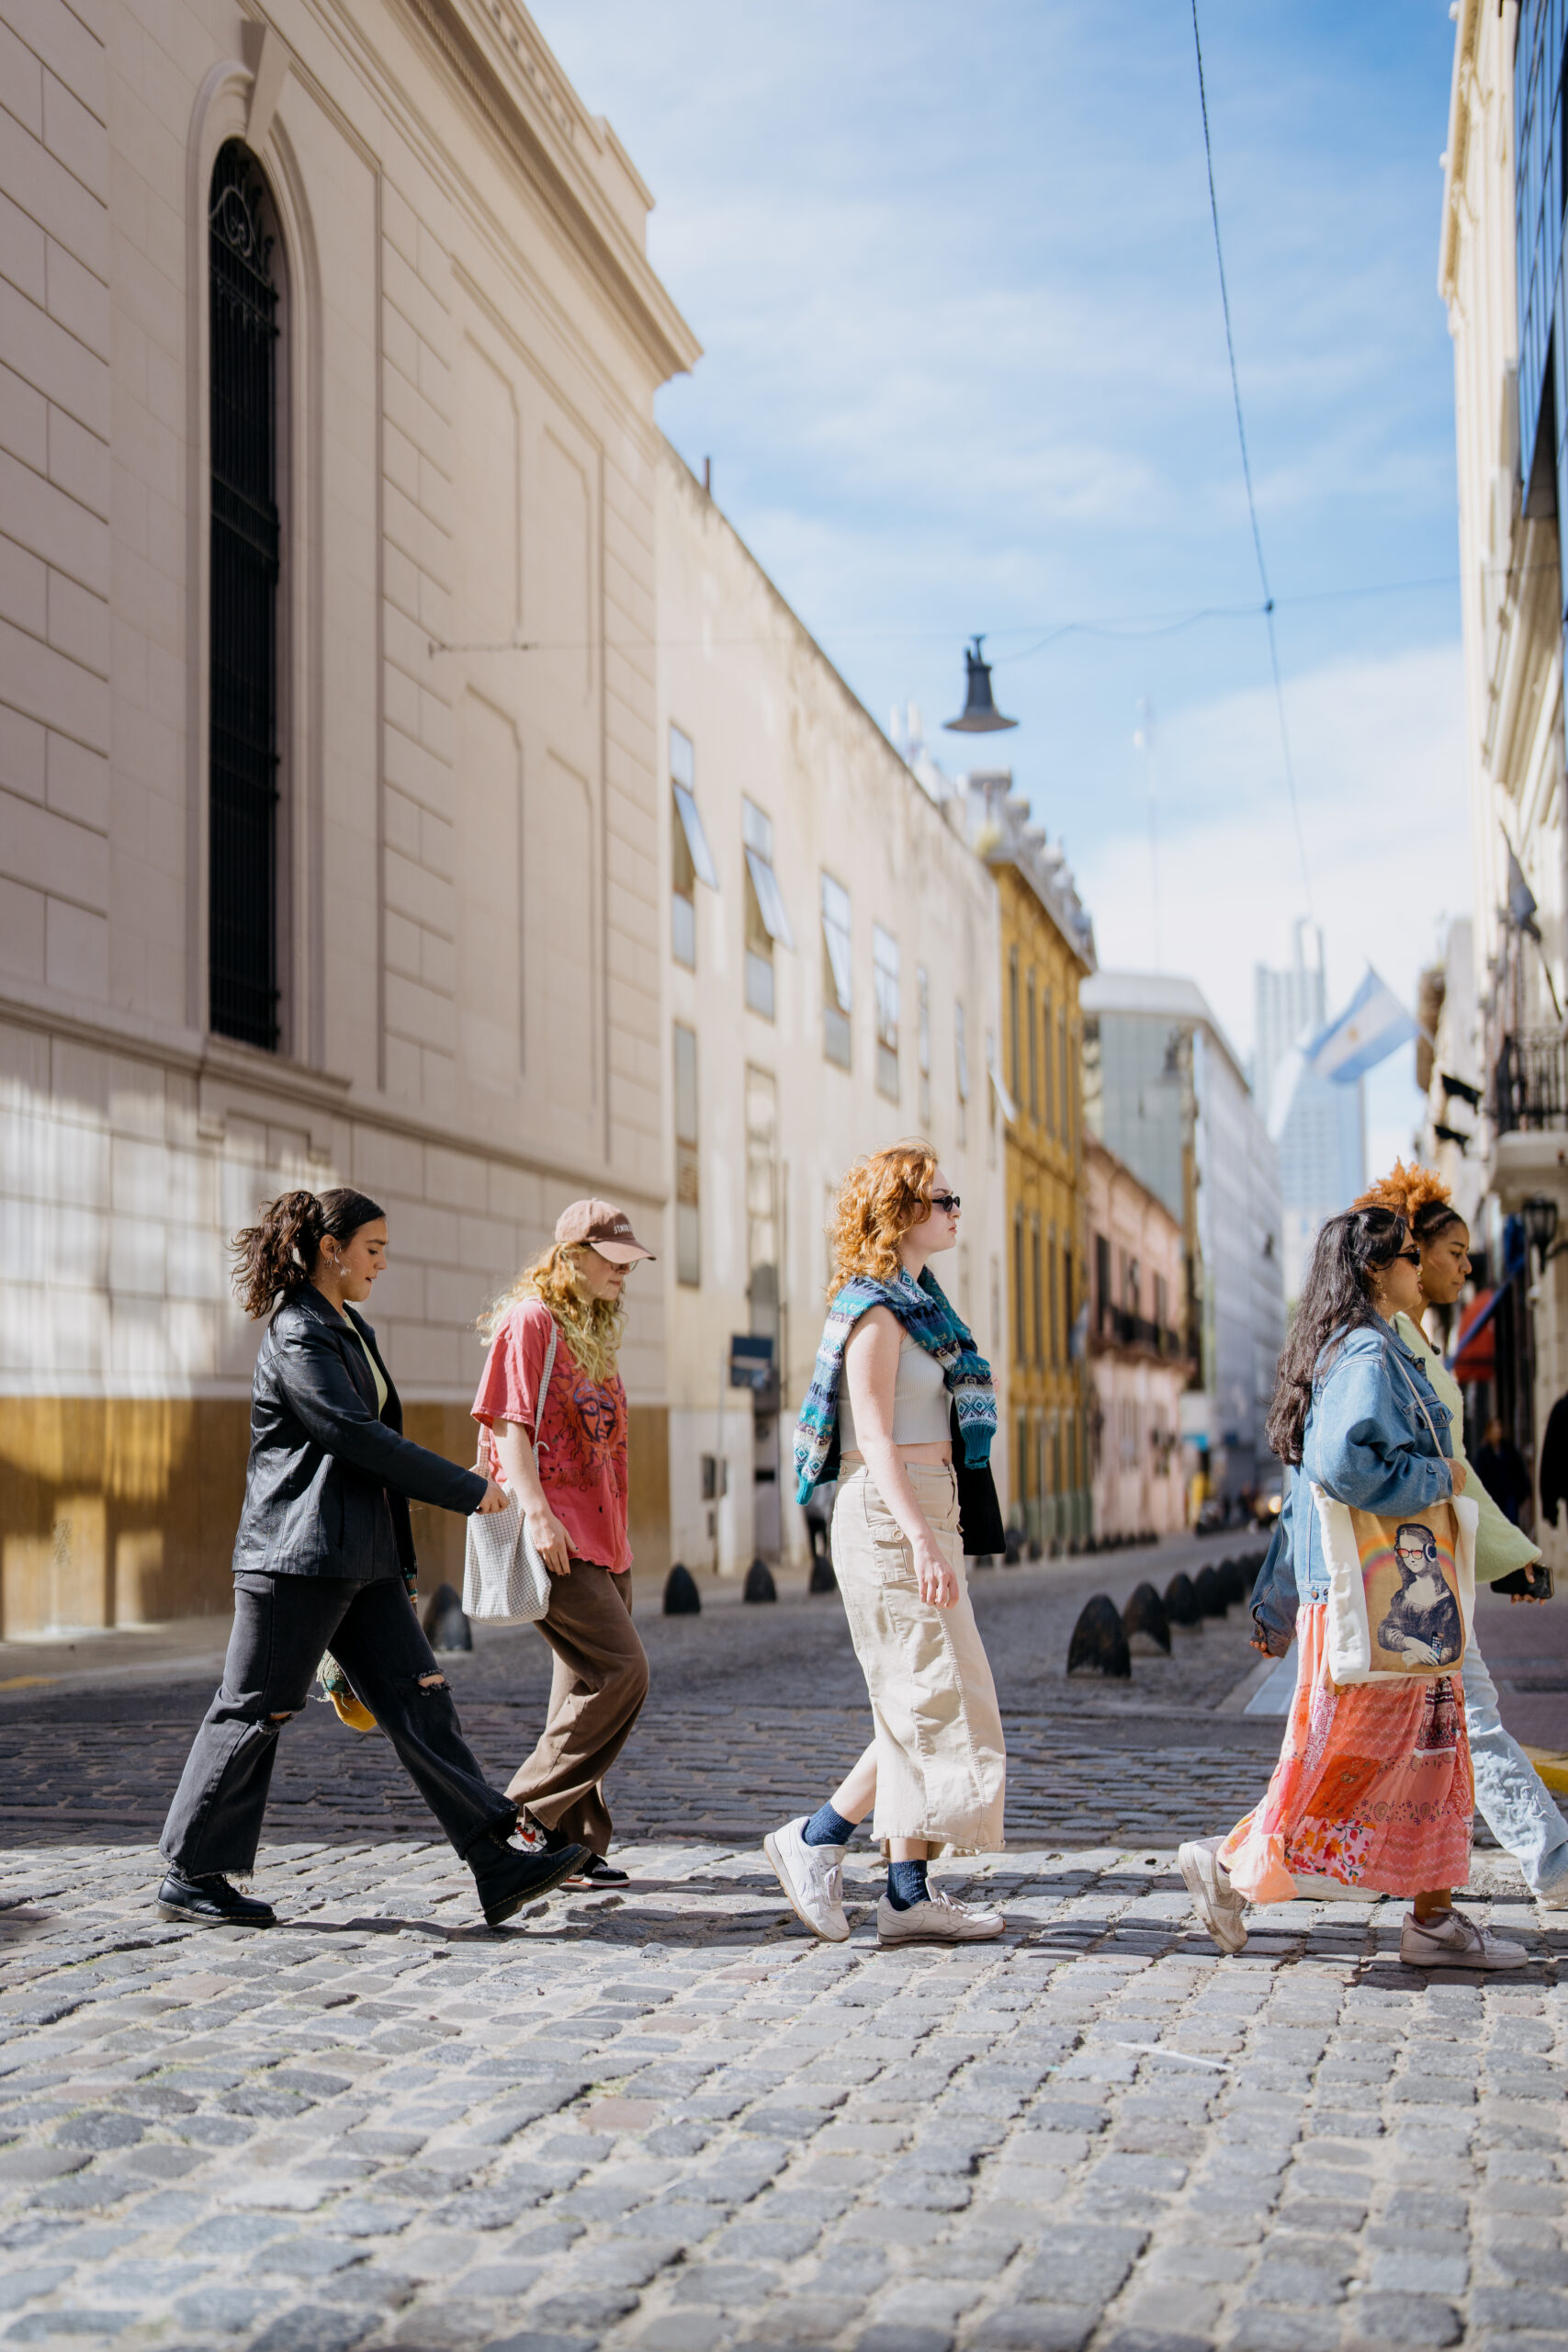 A group of female-presenting study away students walk across a cobblestone street in Buenos Aires.